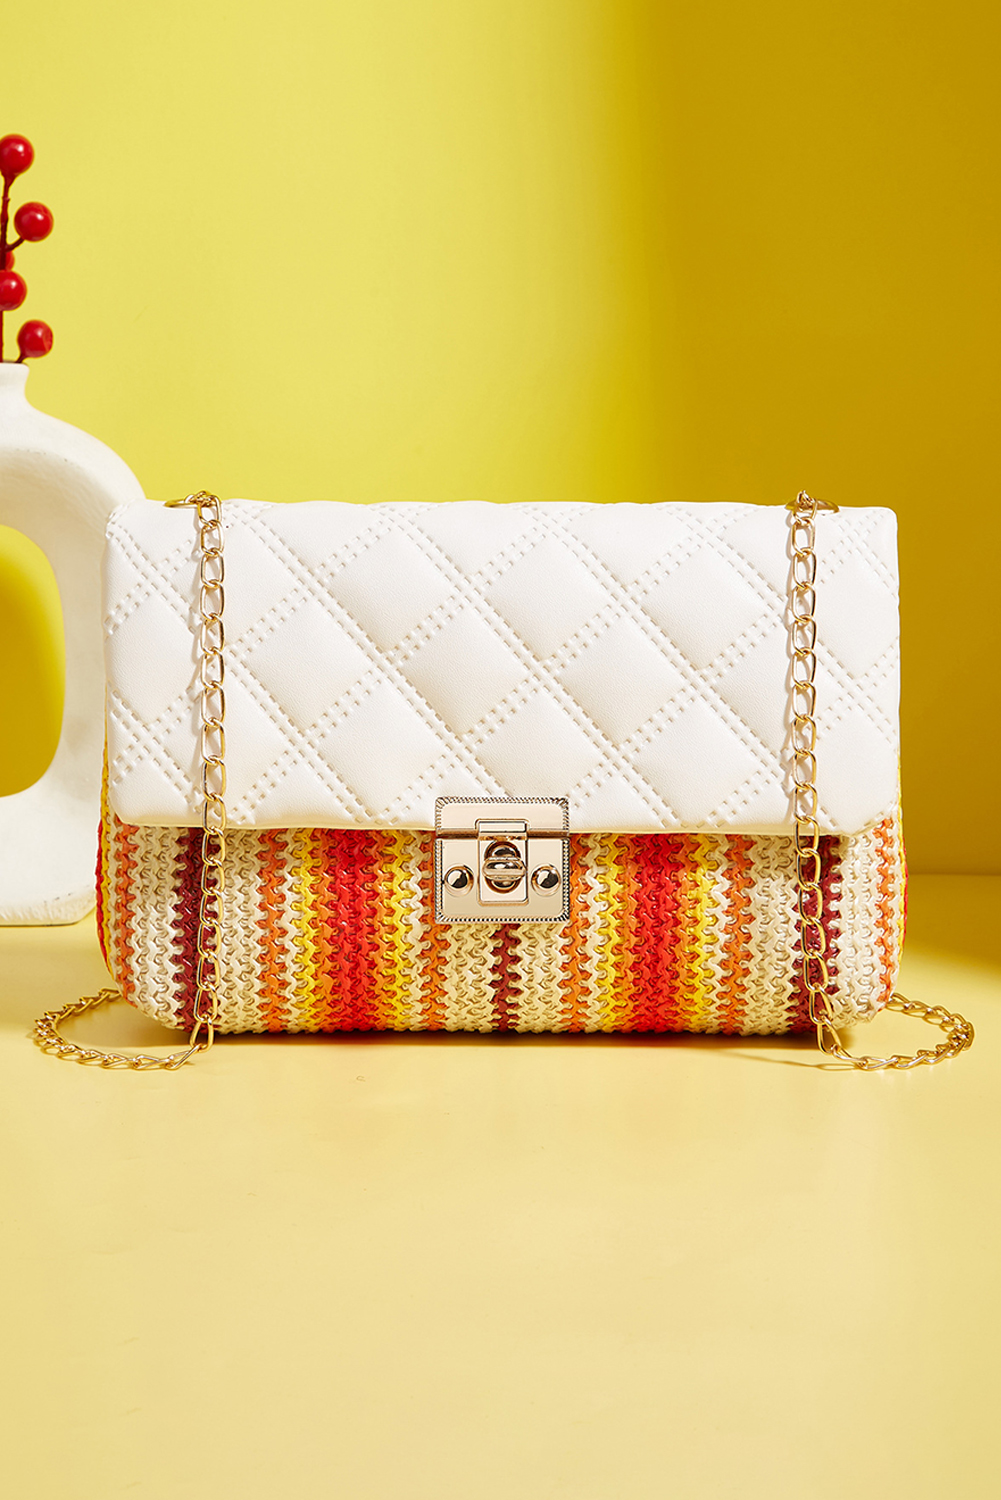 Shewin Wholesale Dropship White Quilted Flap Printed Knit Chain Single SHOULDER BAG